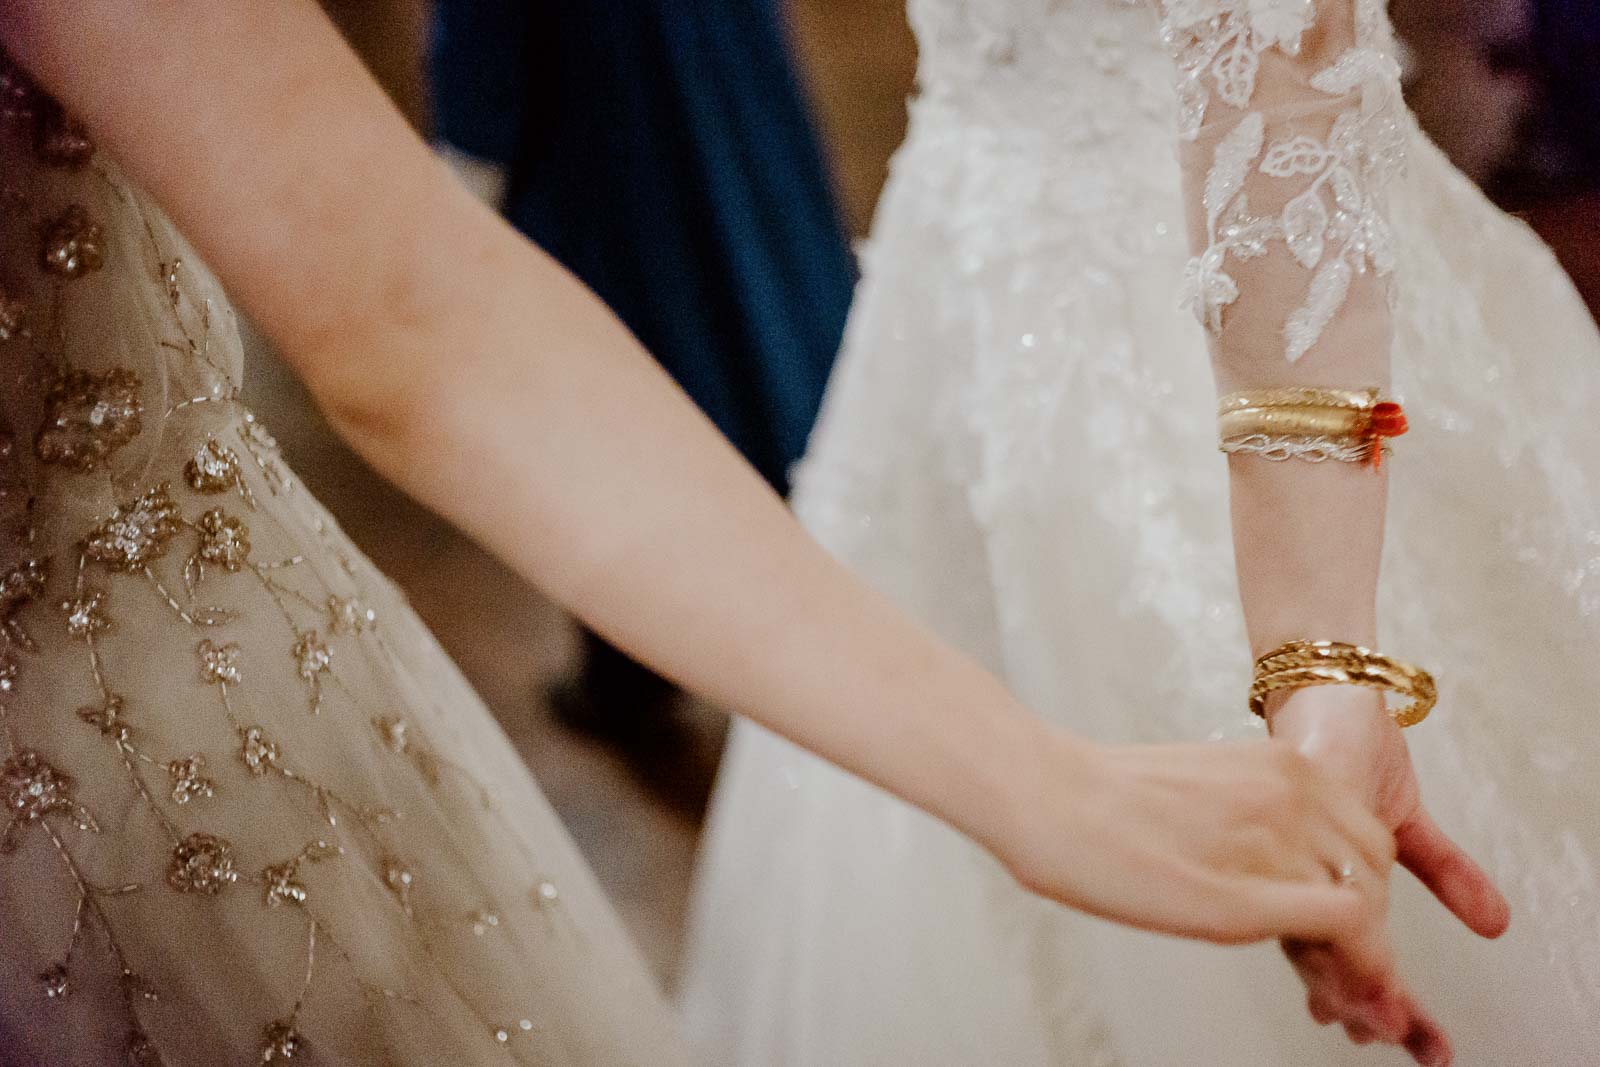 The bride holds hands with her sister at wedding reception